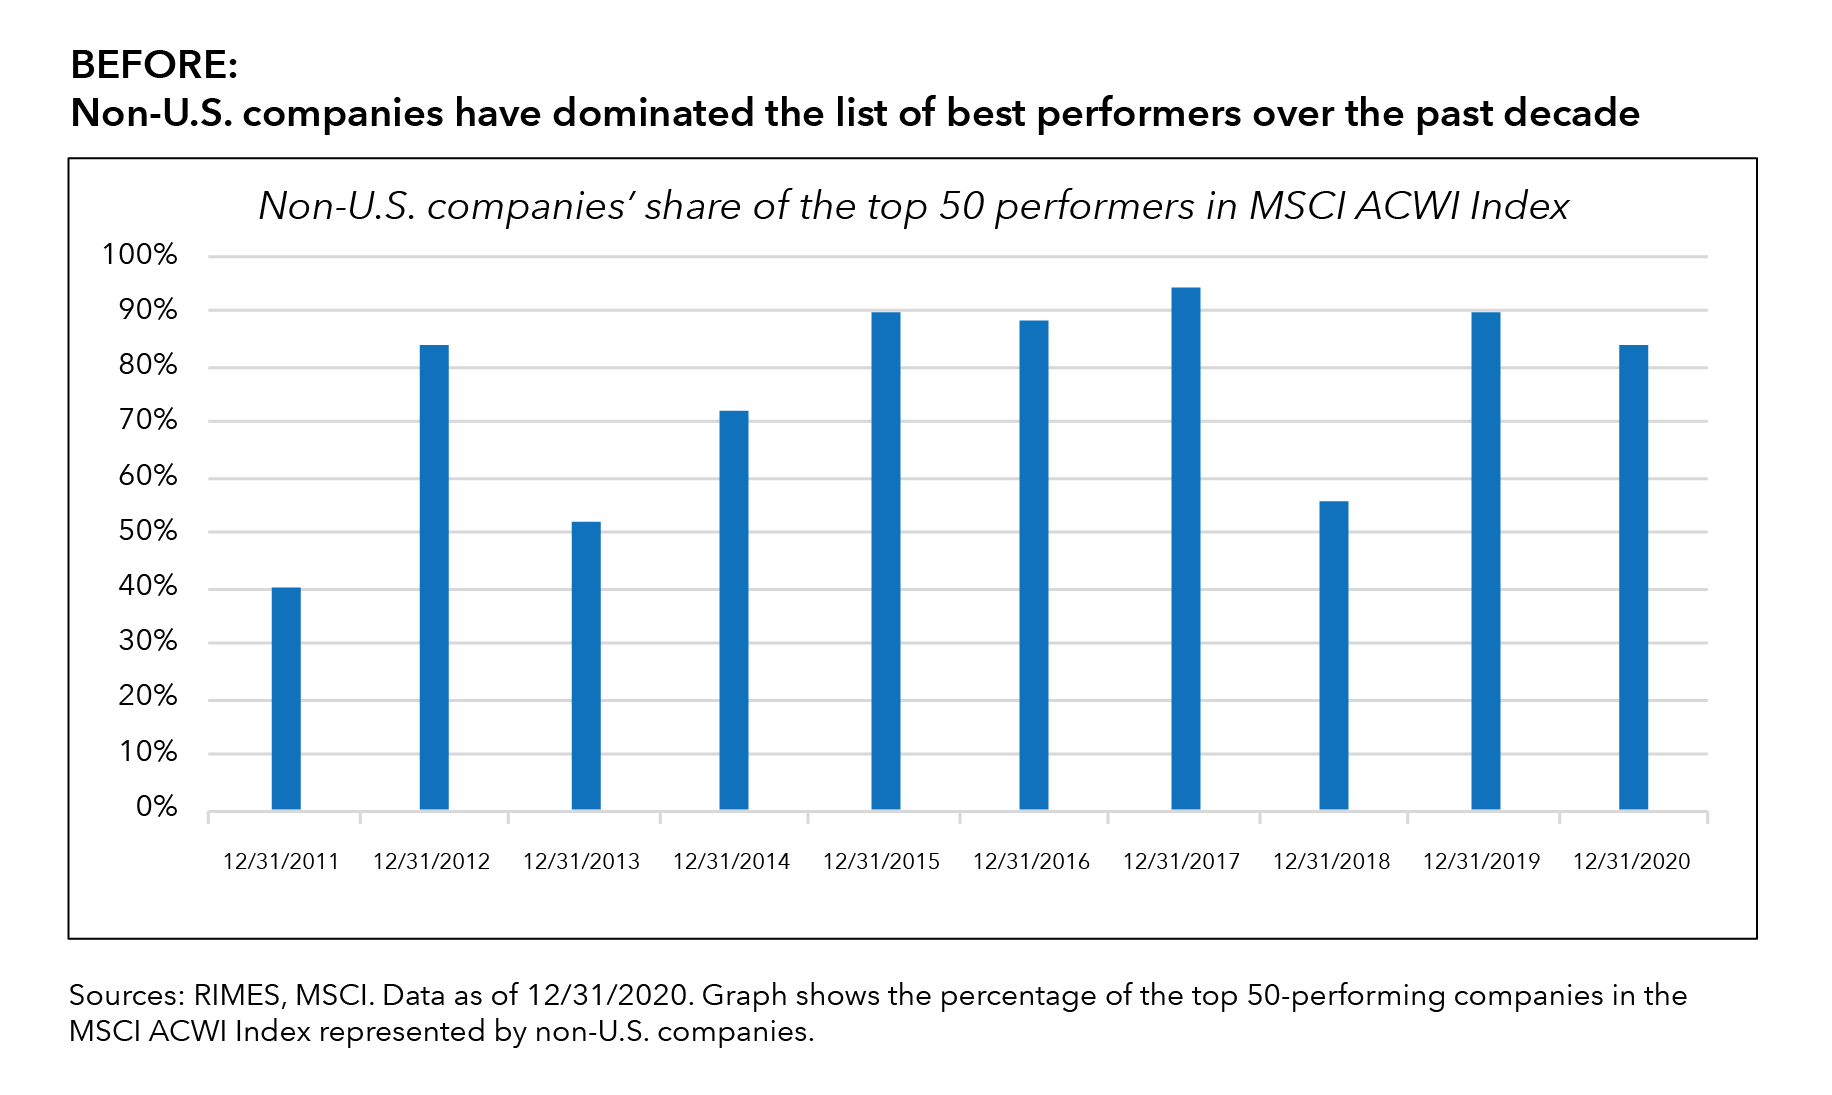 A sample “before” bar chart showing the share of non-U.S. companies within top 50 performers in the MSCI ACWI Index from 2011 to 2020. The chart includes a vertical scale from 0-100%, gridlines and a subhead noting that non-U.S. companies have dominated the list over the past decade. The data is sourced to RIMES and MSCI as of December 31, 2020.